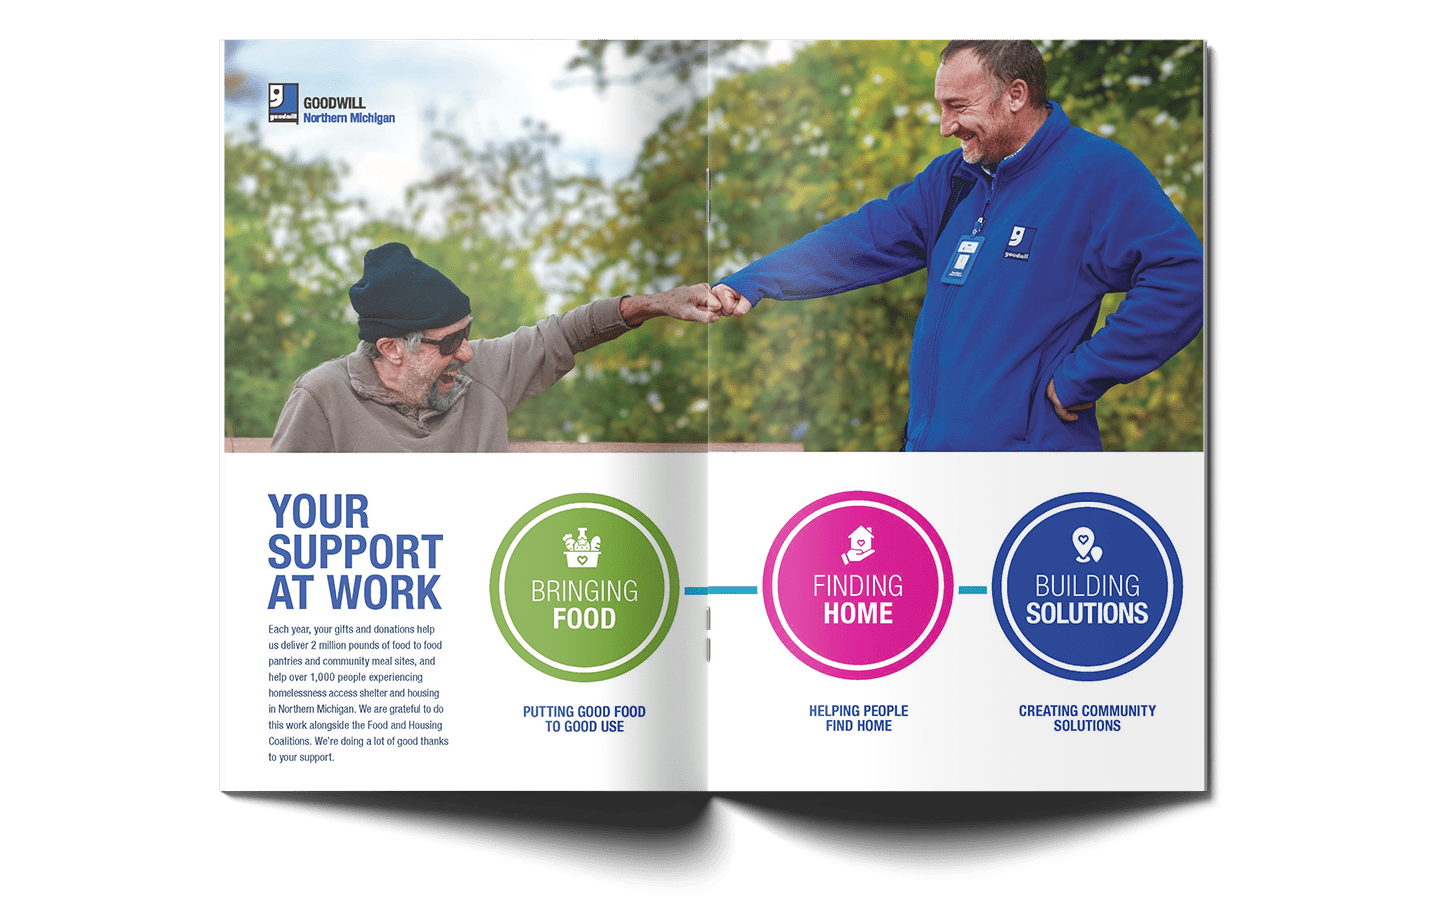 Spread from the Goodwill annual report showing three key pillar areas